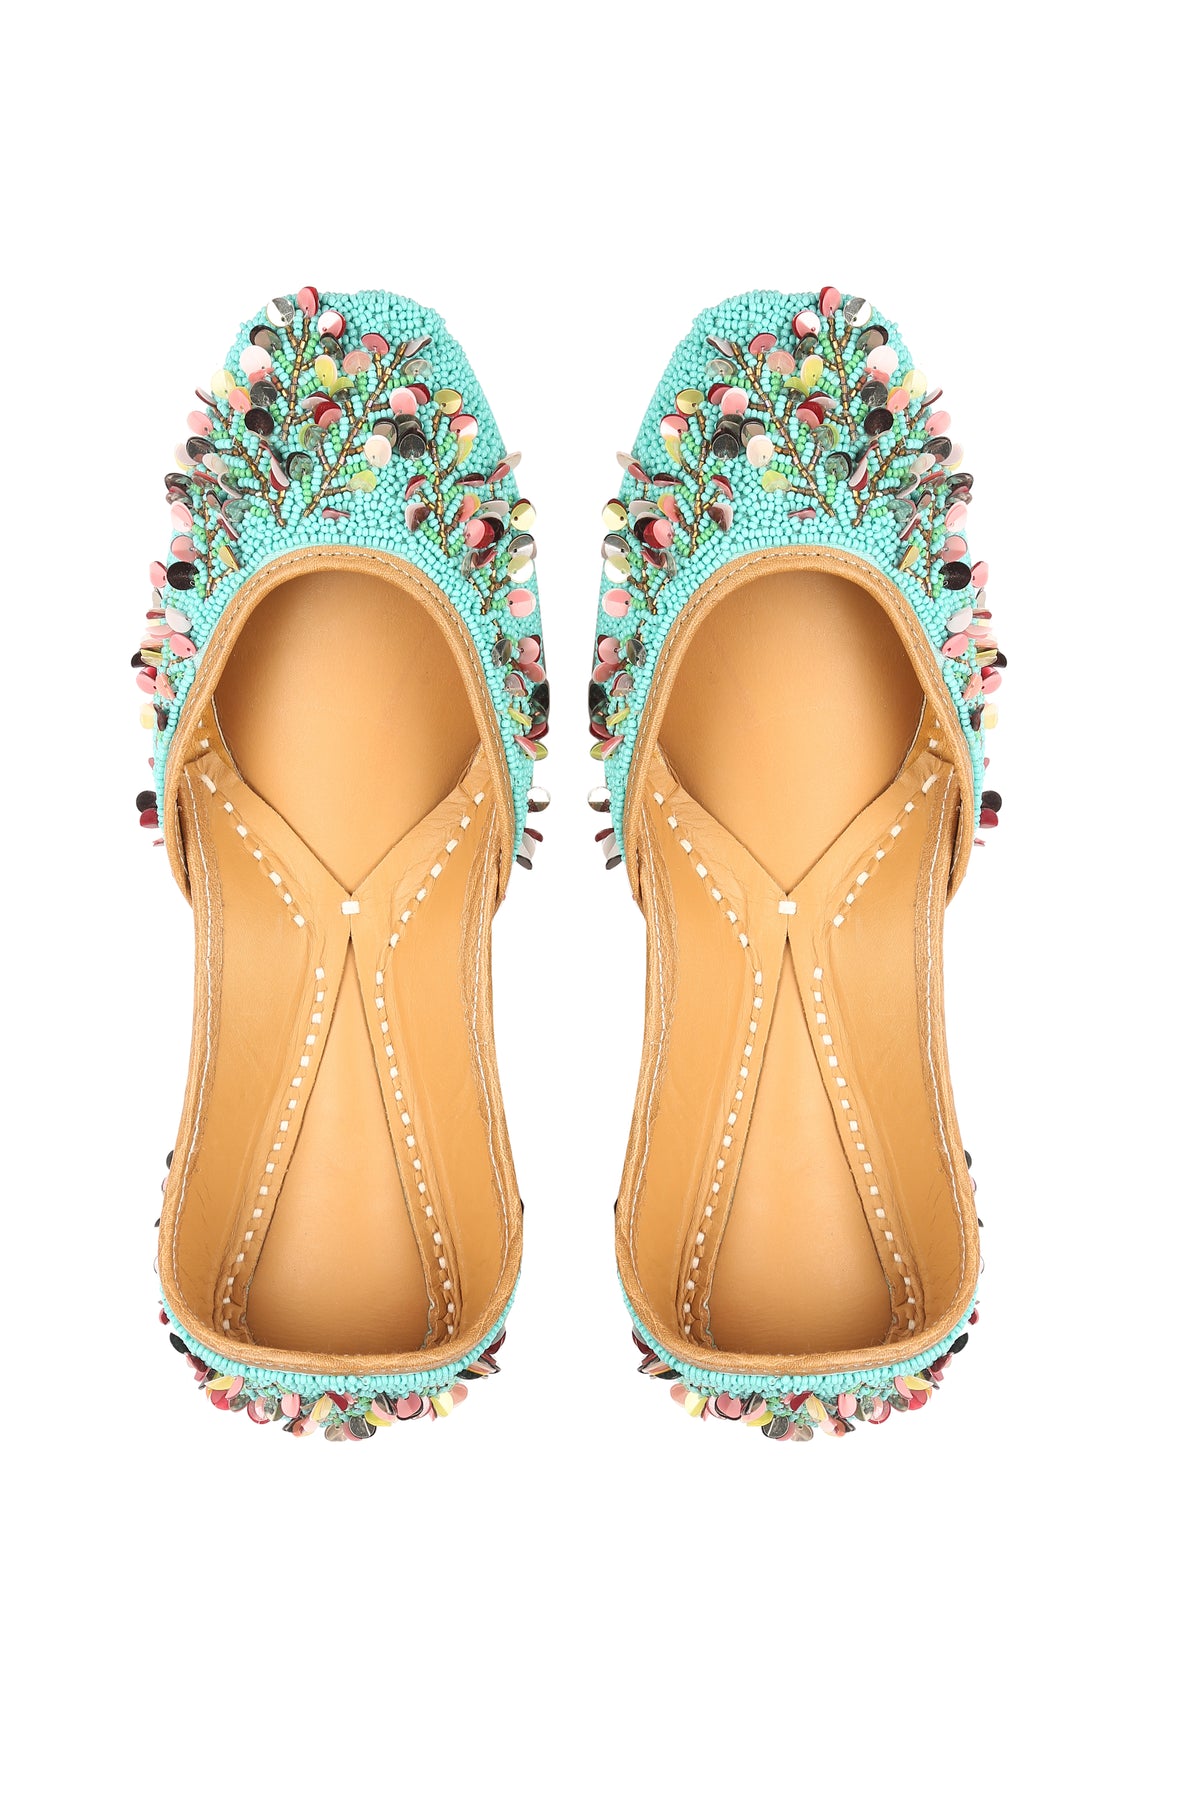 Turquoise jutti with sequins